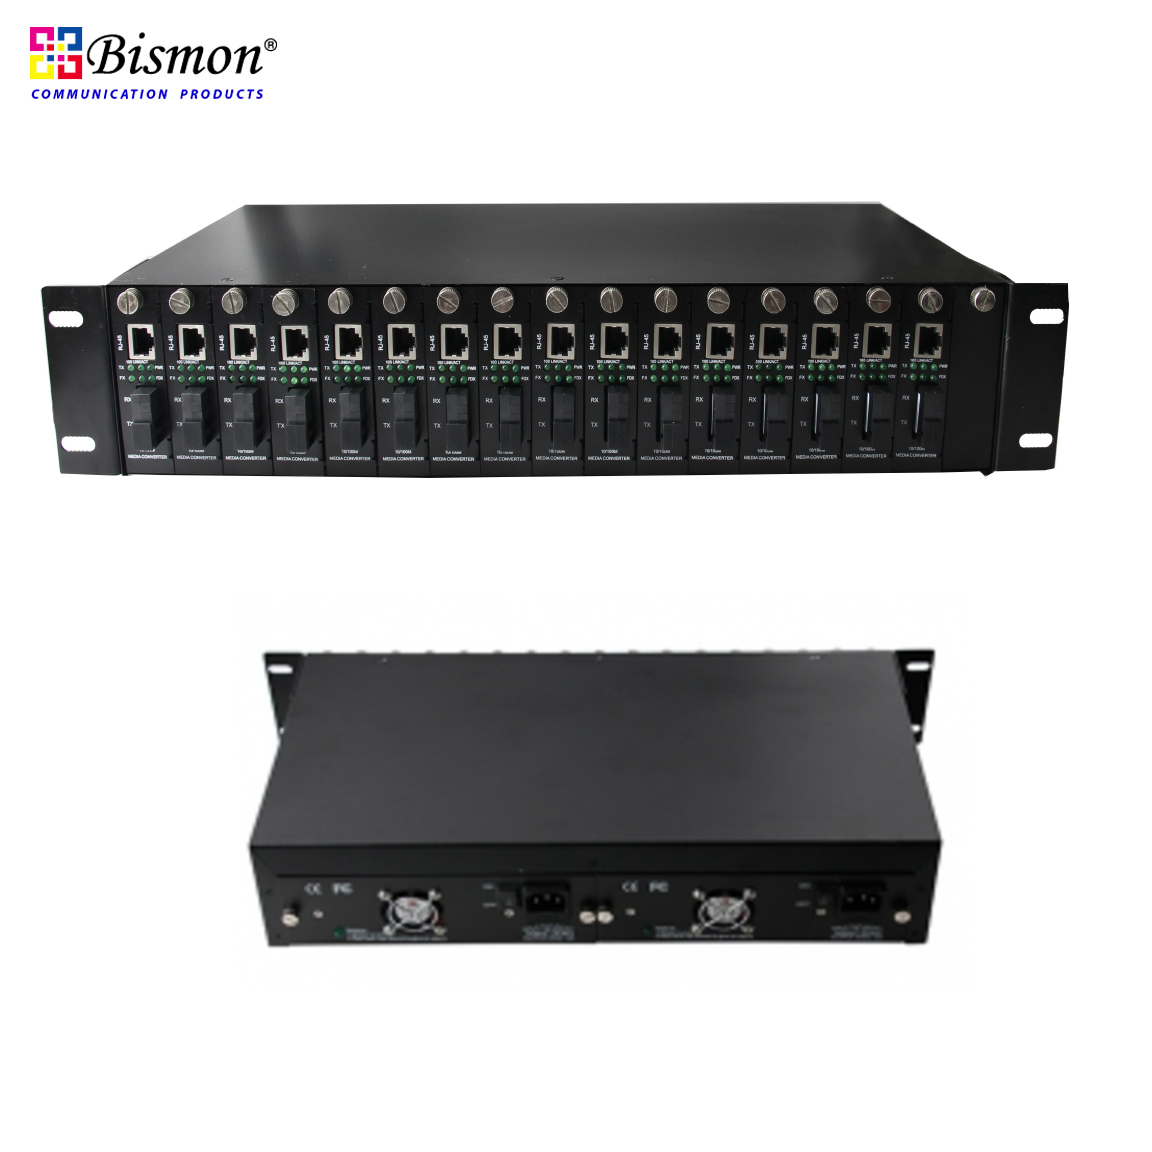 16-Slot-19-Rack-Chassis-Media-Converter-Double-Power-Supply-for-card